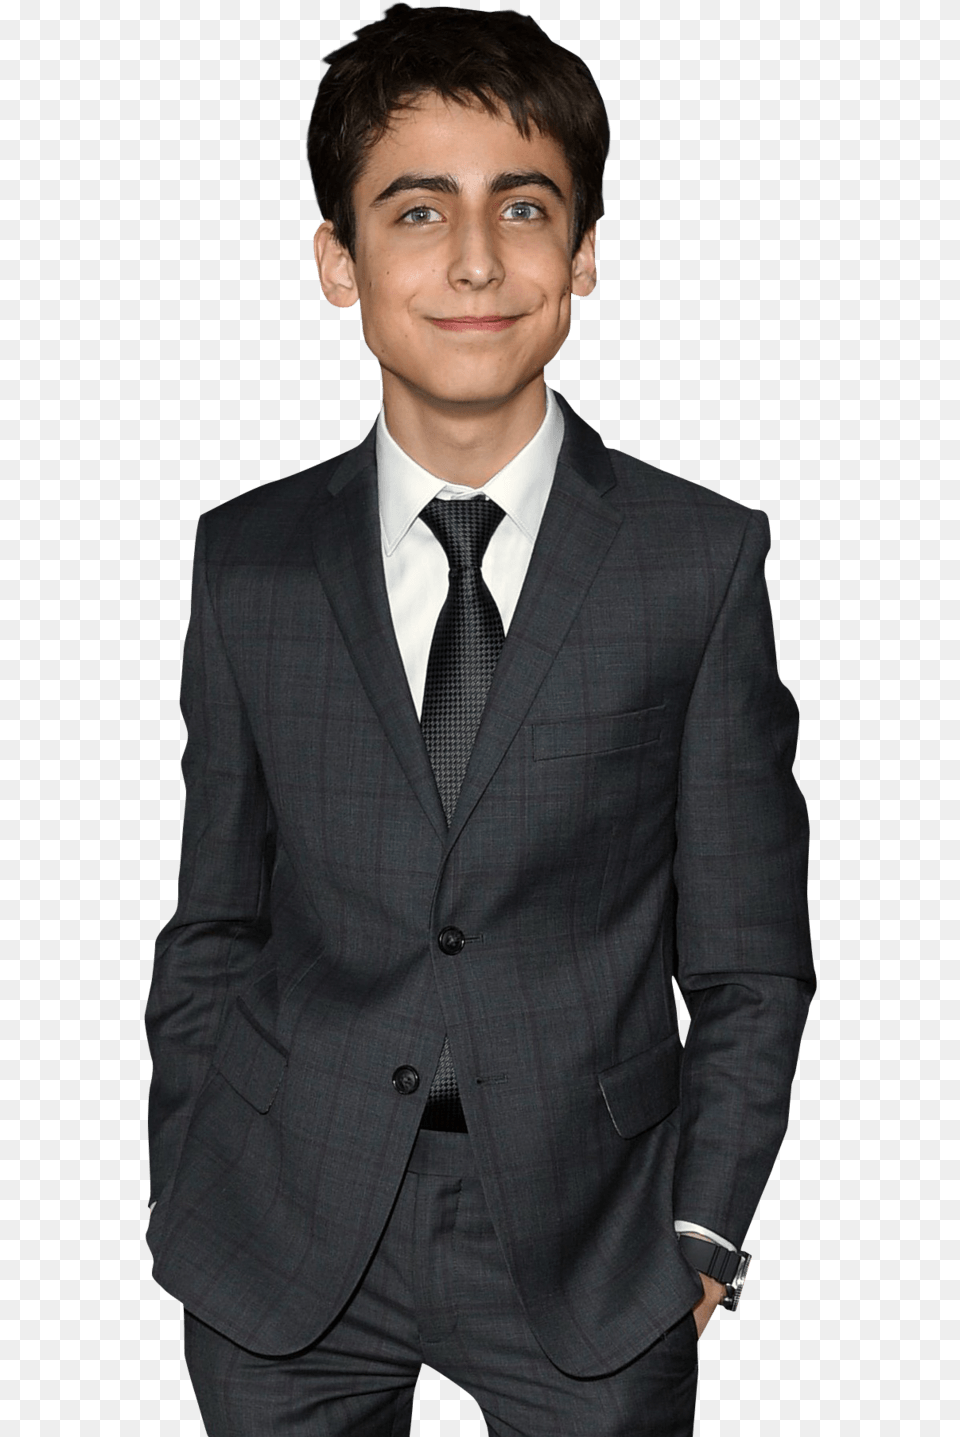 The Umbrella Academy39s Aidan Gallagher Is An Old Soul Luqman Hariz Astro Awani, Accessories, Tie, Suit, Tuxedo Free Png